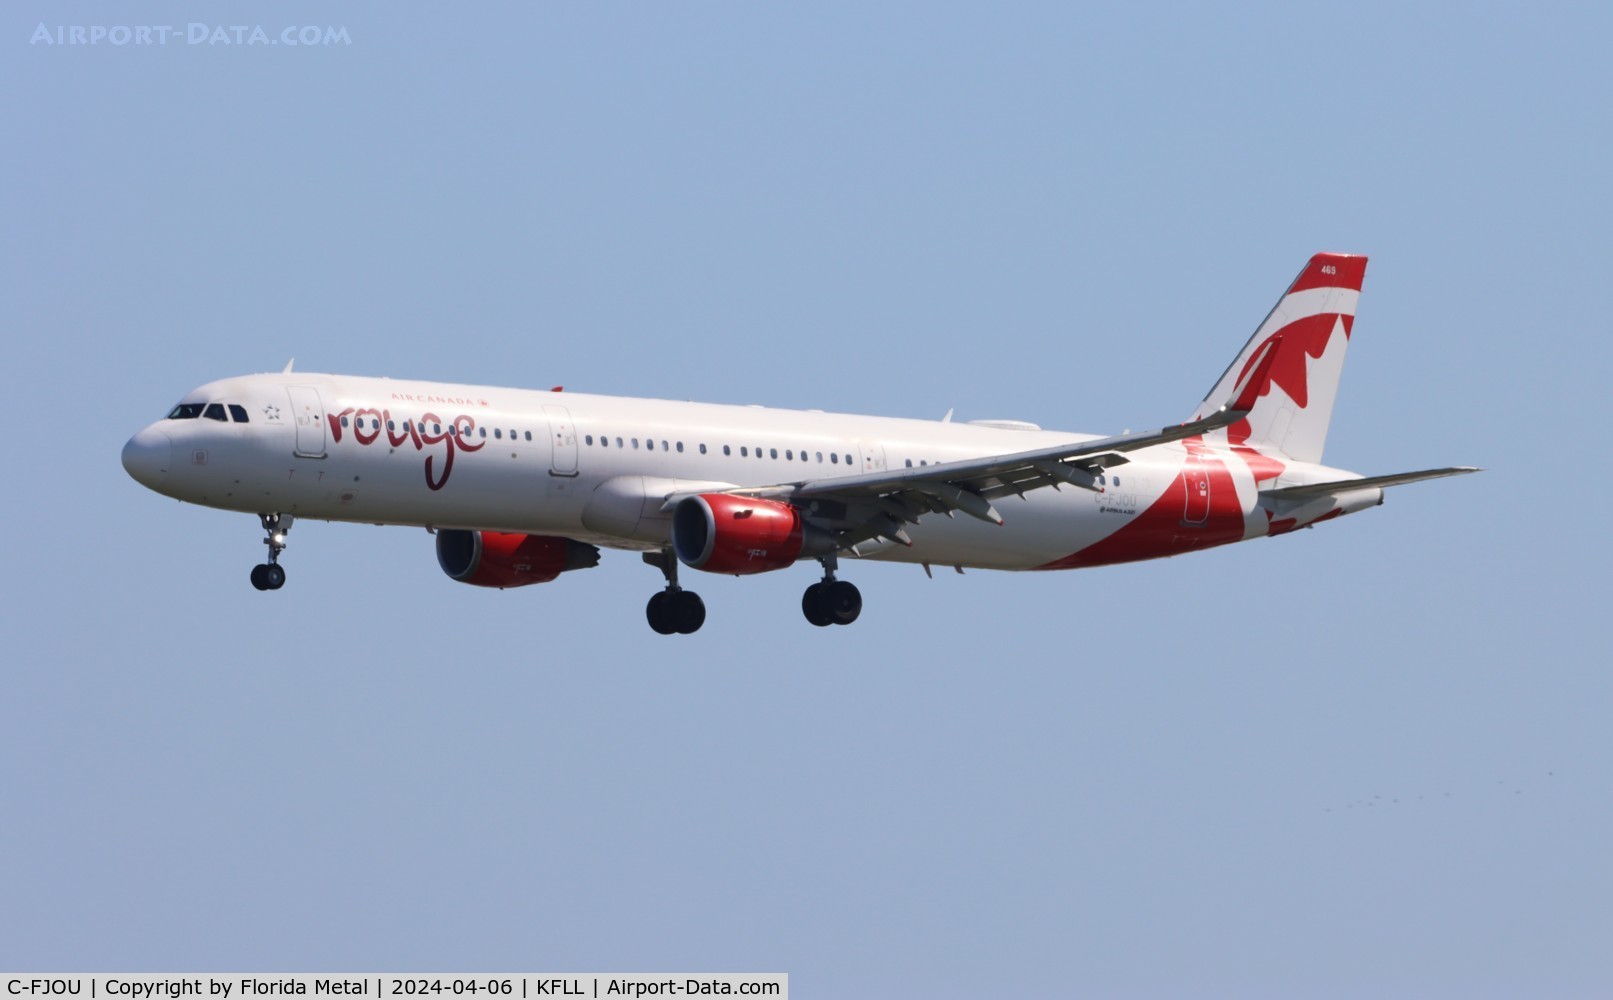 C-FJOU, 2015 Airbus A321-211 C/N 6873, Rouge A321 zx CYUL-FLL from Montreal QB